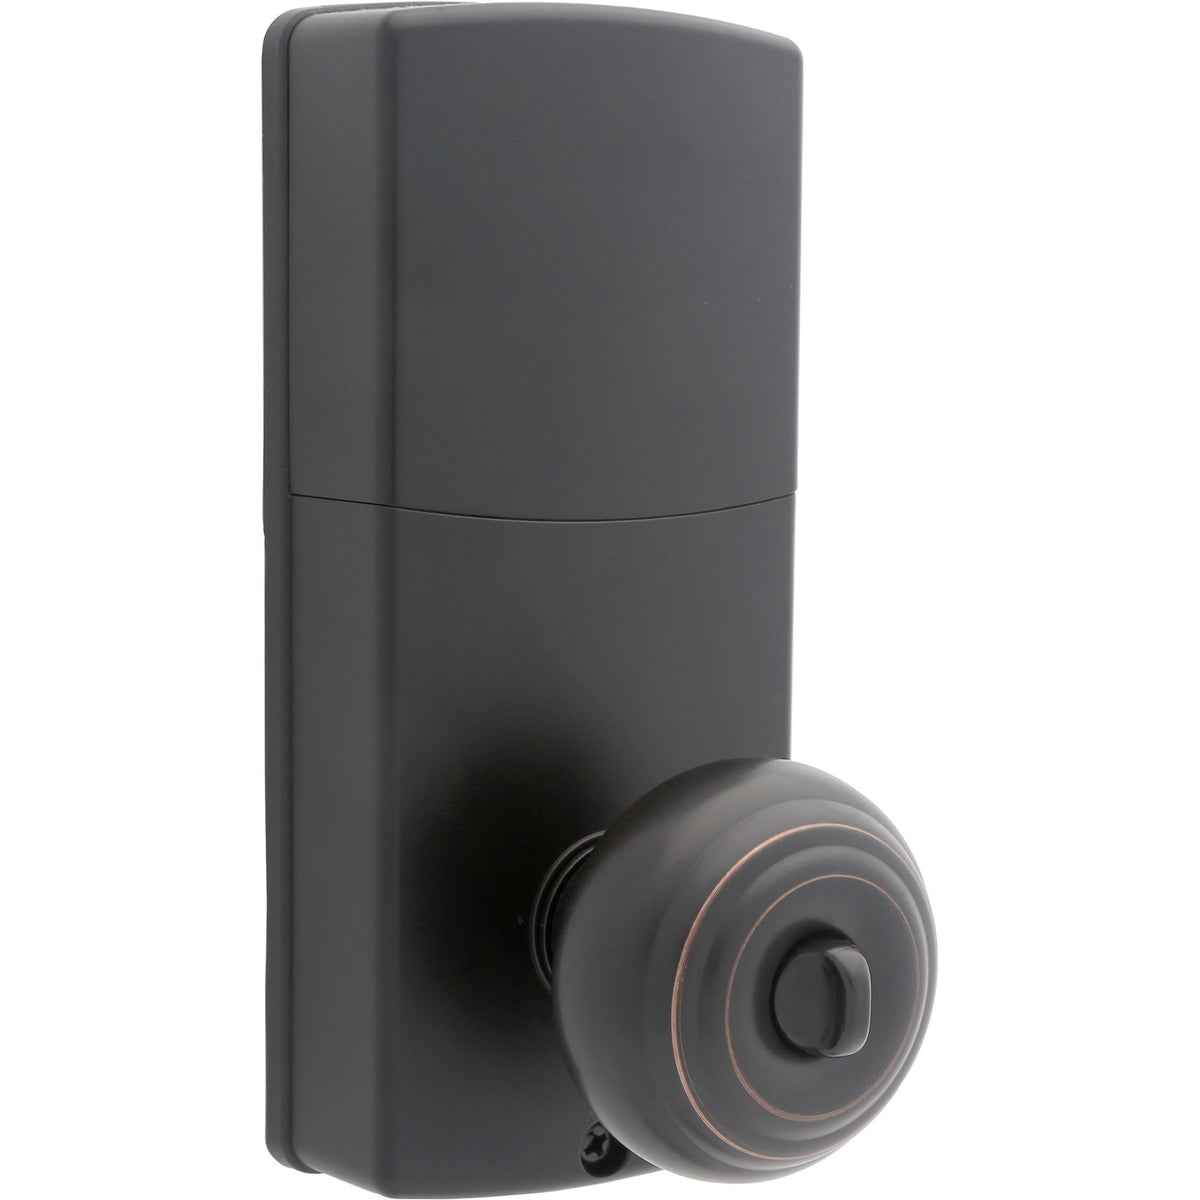 Honeywell 8732401 Electronic Entry Knob Door Lock with Keypad in Oil Rubbed Bronze